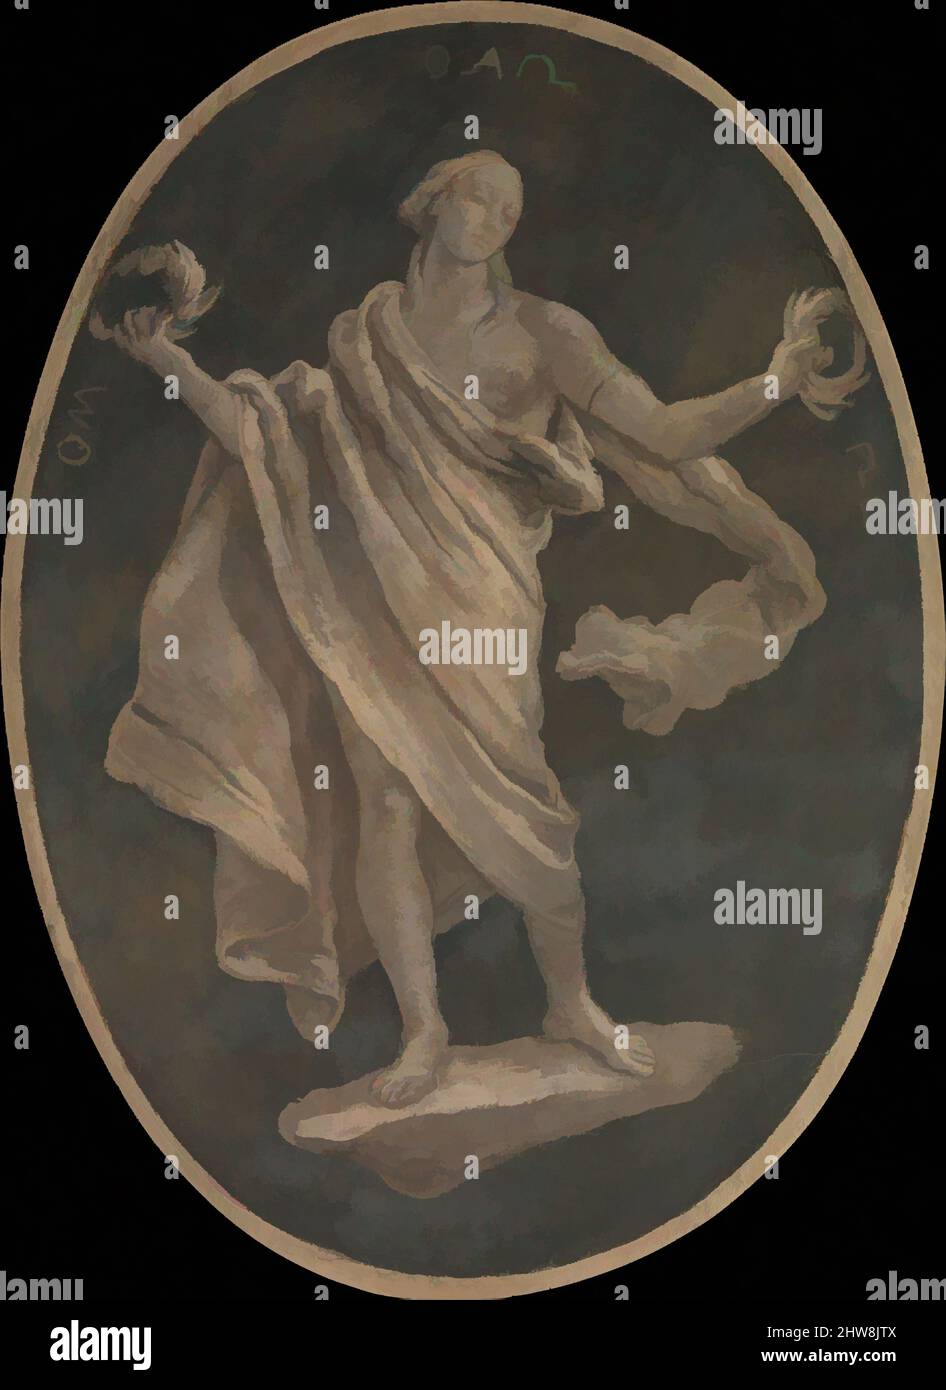 Art inspired by A Virtue, Possibly Patriotism, 1760, Fresco, transferred to canvas, Oval, 49 3/8 x 36 1/4 in. (125.4 x 92.1 cm), Paintings, Workshop of Giovanni Battista Tiepolo (Italian, Venice 1696–1770 Madrid), This detached fresco is from a series of four ovals that were designed, Classic works modernized by Artotop with a splash of modernity. Shapes, color and value, eye-catching visual impact on art. Emotions through freedom of artworks in a contemporary way. A timeless message pursuing a wildly creative new direction. Artists turning to the digital medium and creating the Artotop NFT Stock Photo